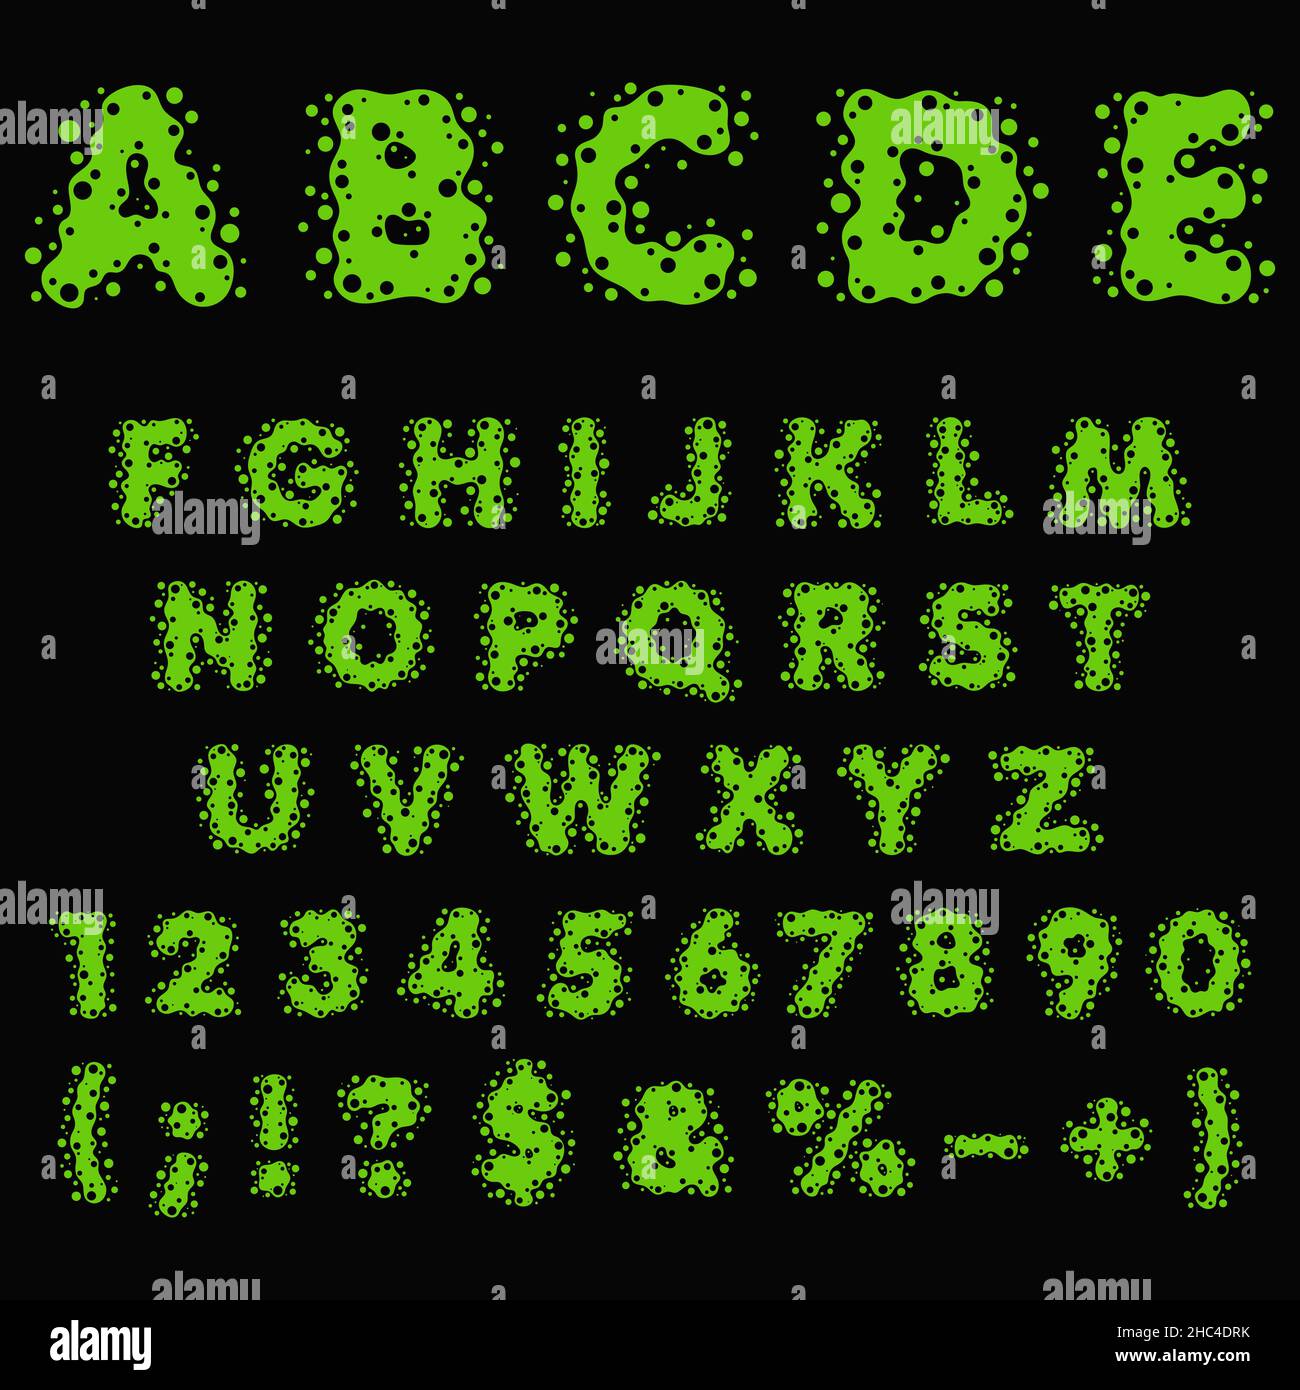 Alphabet, letters, numbers and signs made of green slime, liquid. Isolated colored vector objects on a black background. Stock Vector